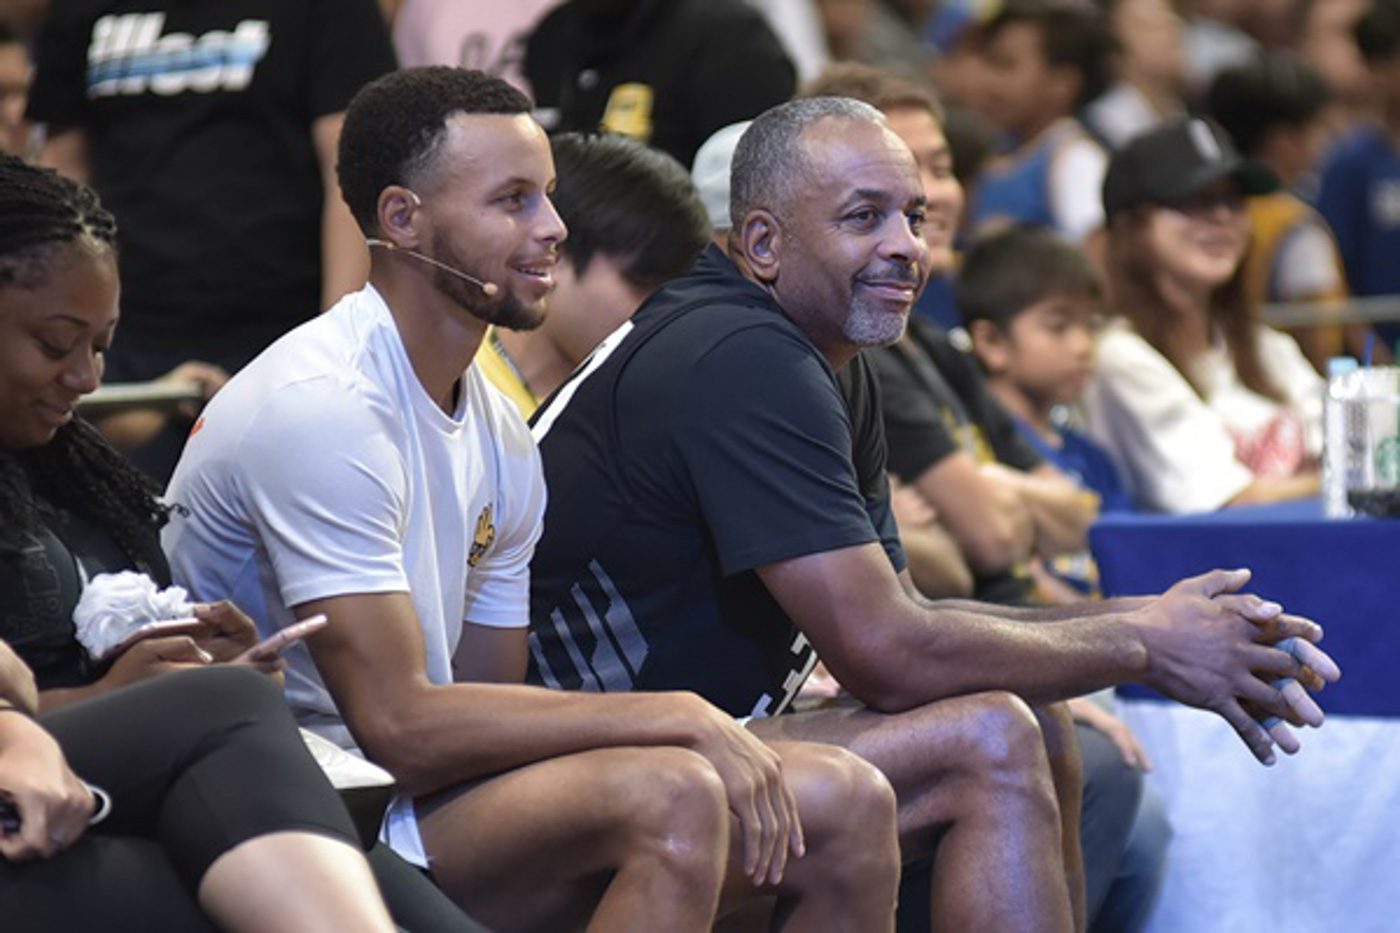 Dell Curry didn't let Steph shoot 3s as a kid. Here's why